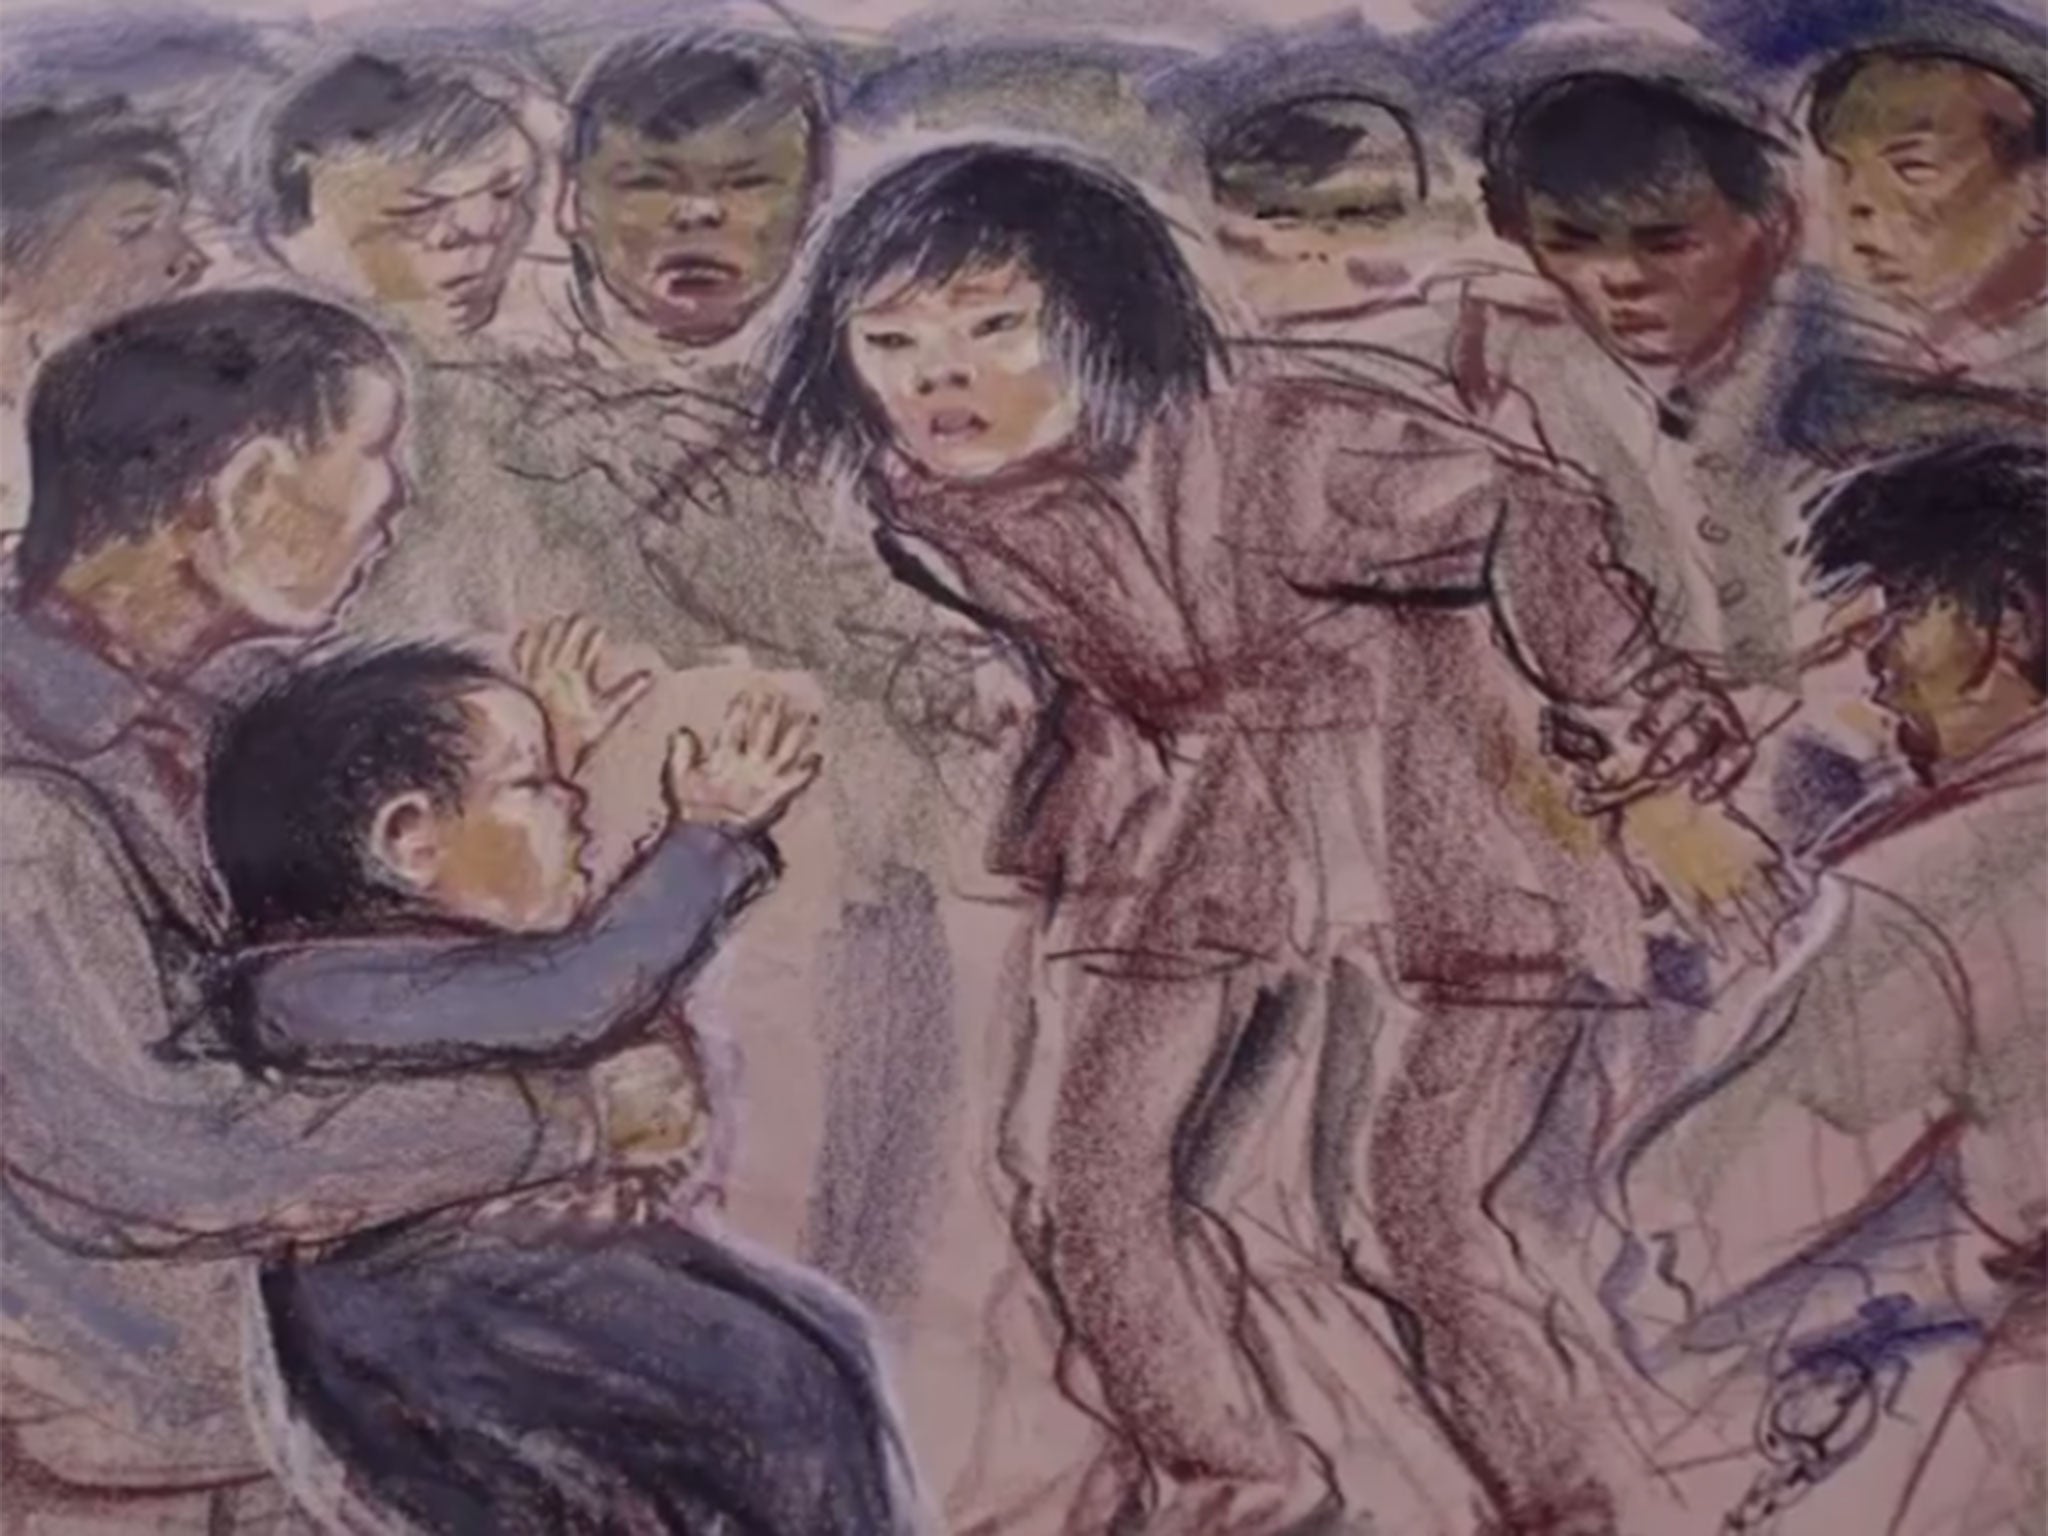 Park Ji-hyun talks to Amnesty International about a life trying to flee the famine and torture of North Korea.